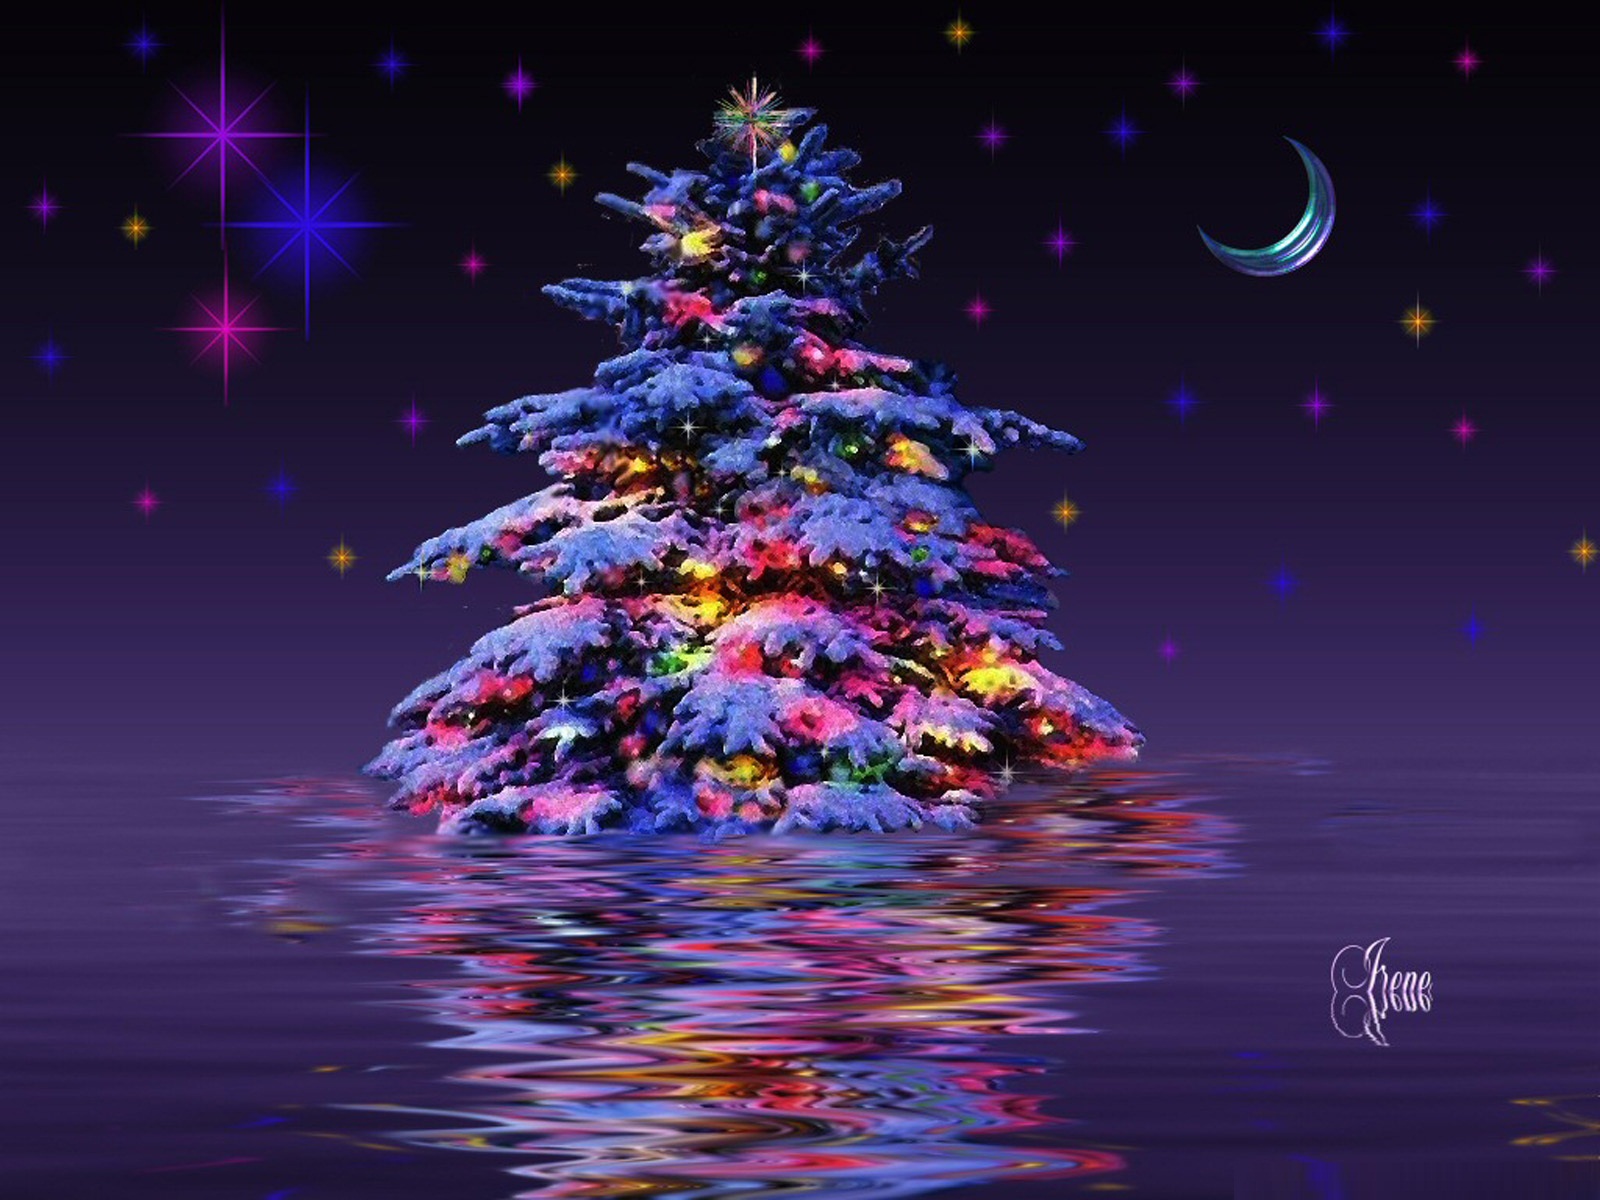 3d Christmas Tree Wallpapers Free 3d Christmas Tree Backgrounds